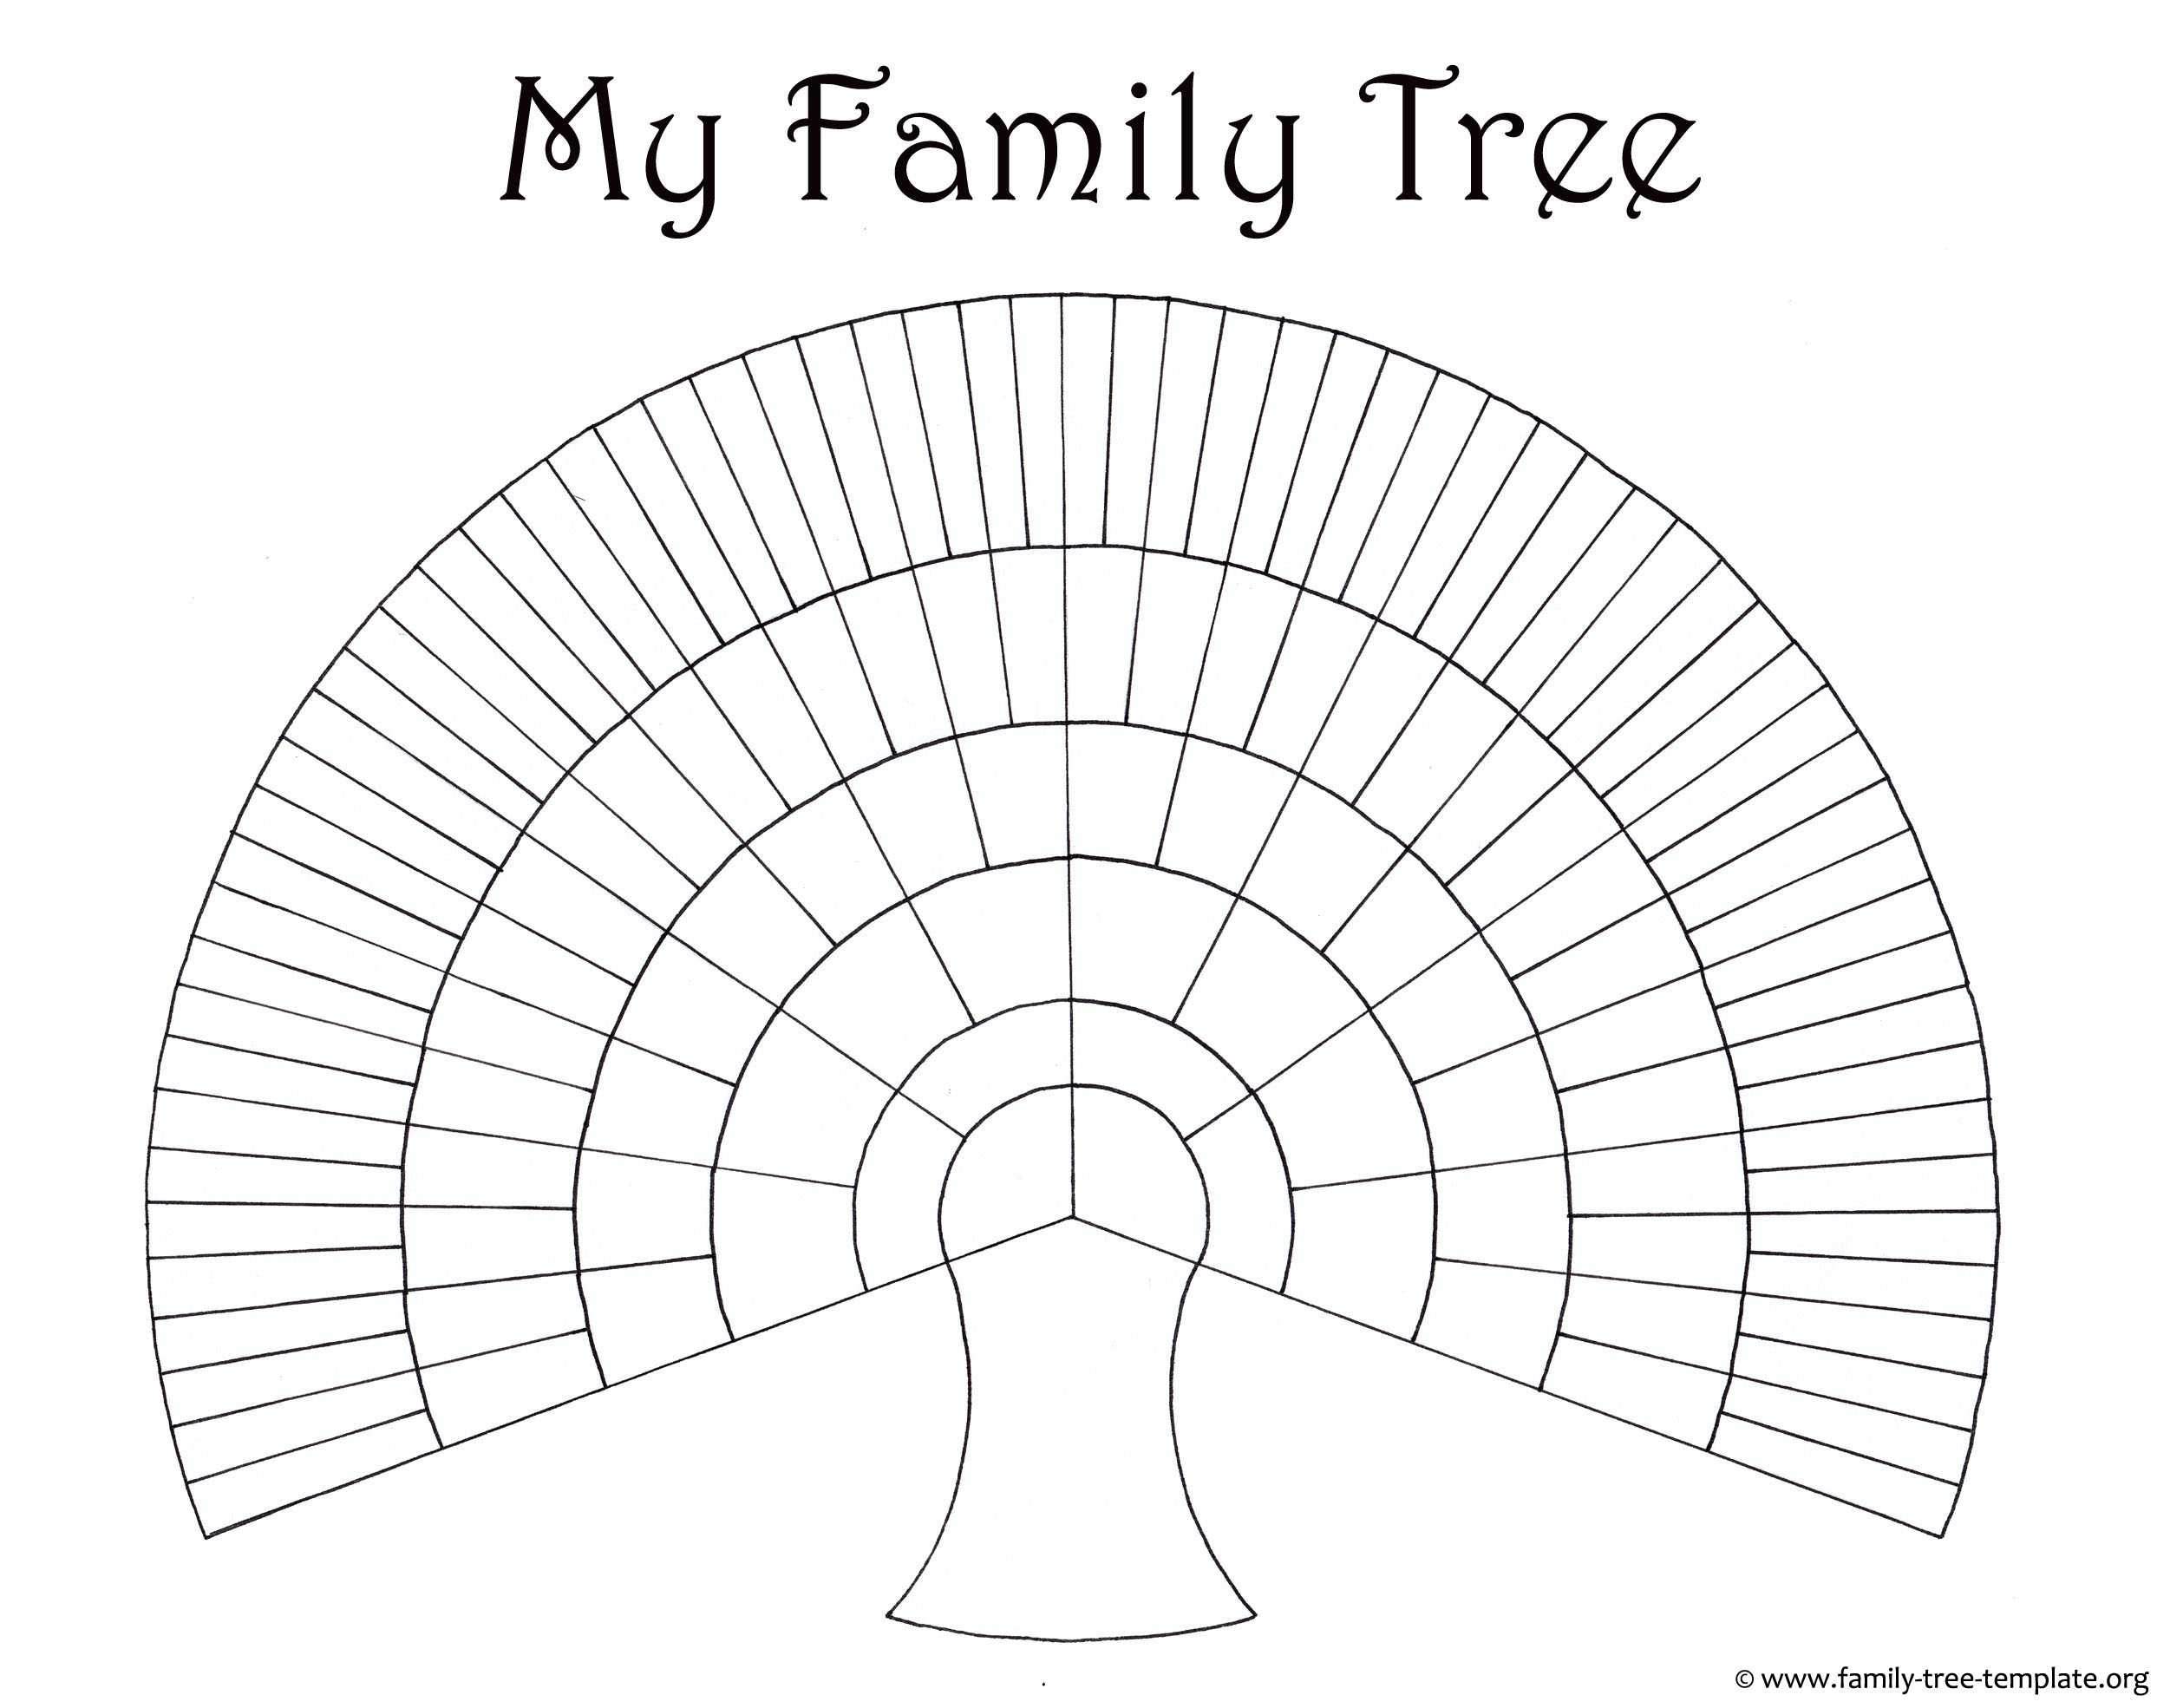 Blank Family Trees Templates And Free Genealogy Graphics With Fill In The Blank Family Tree Template